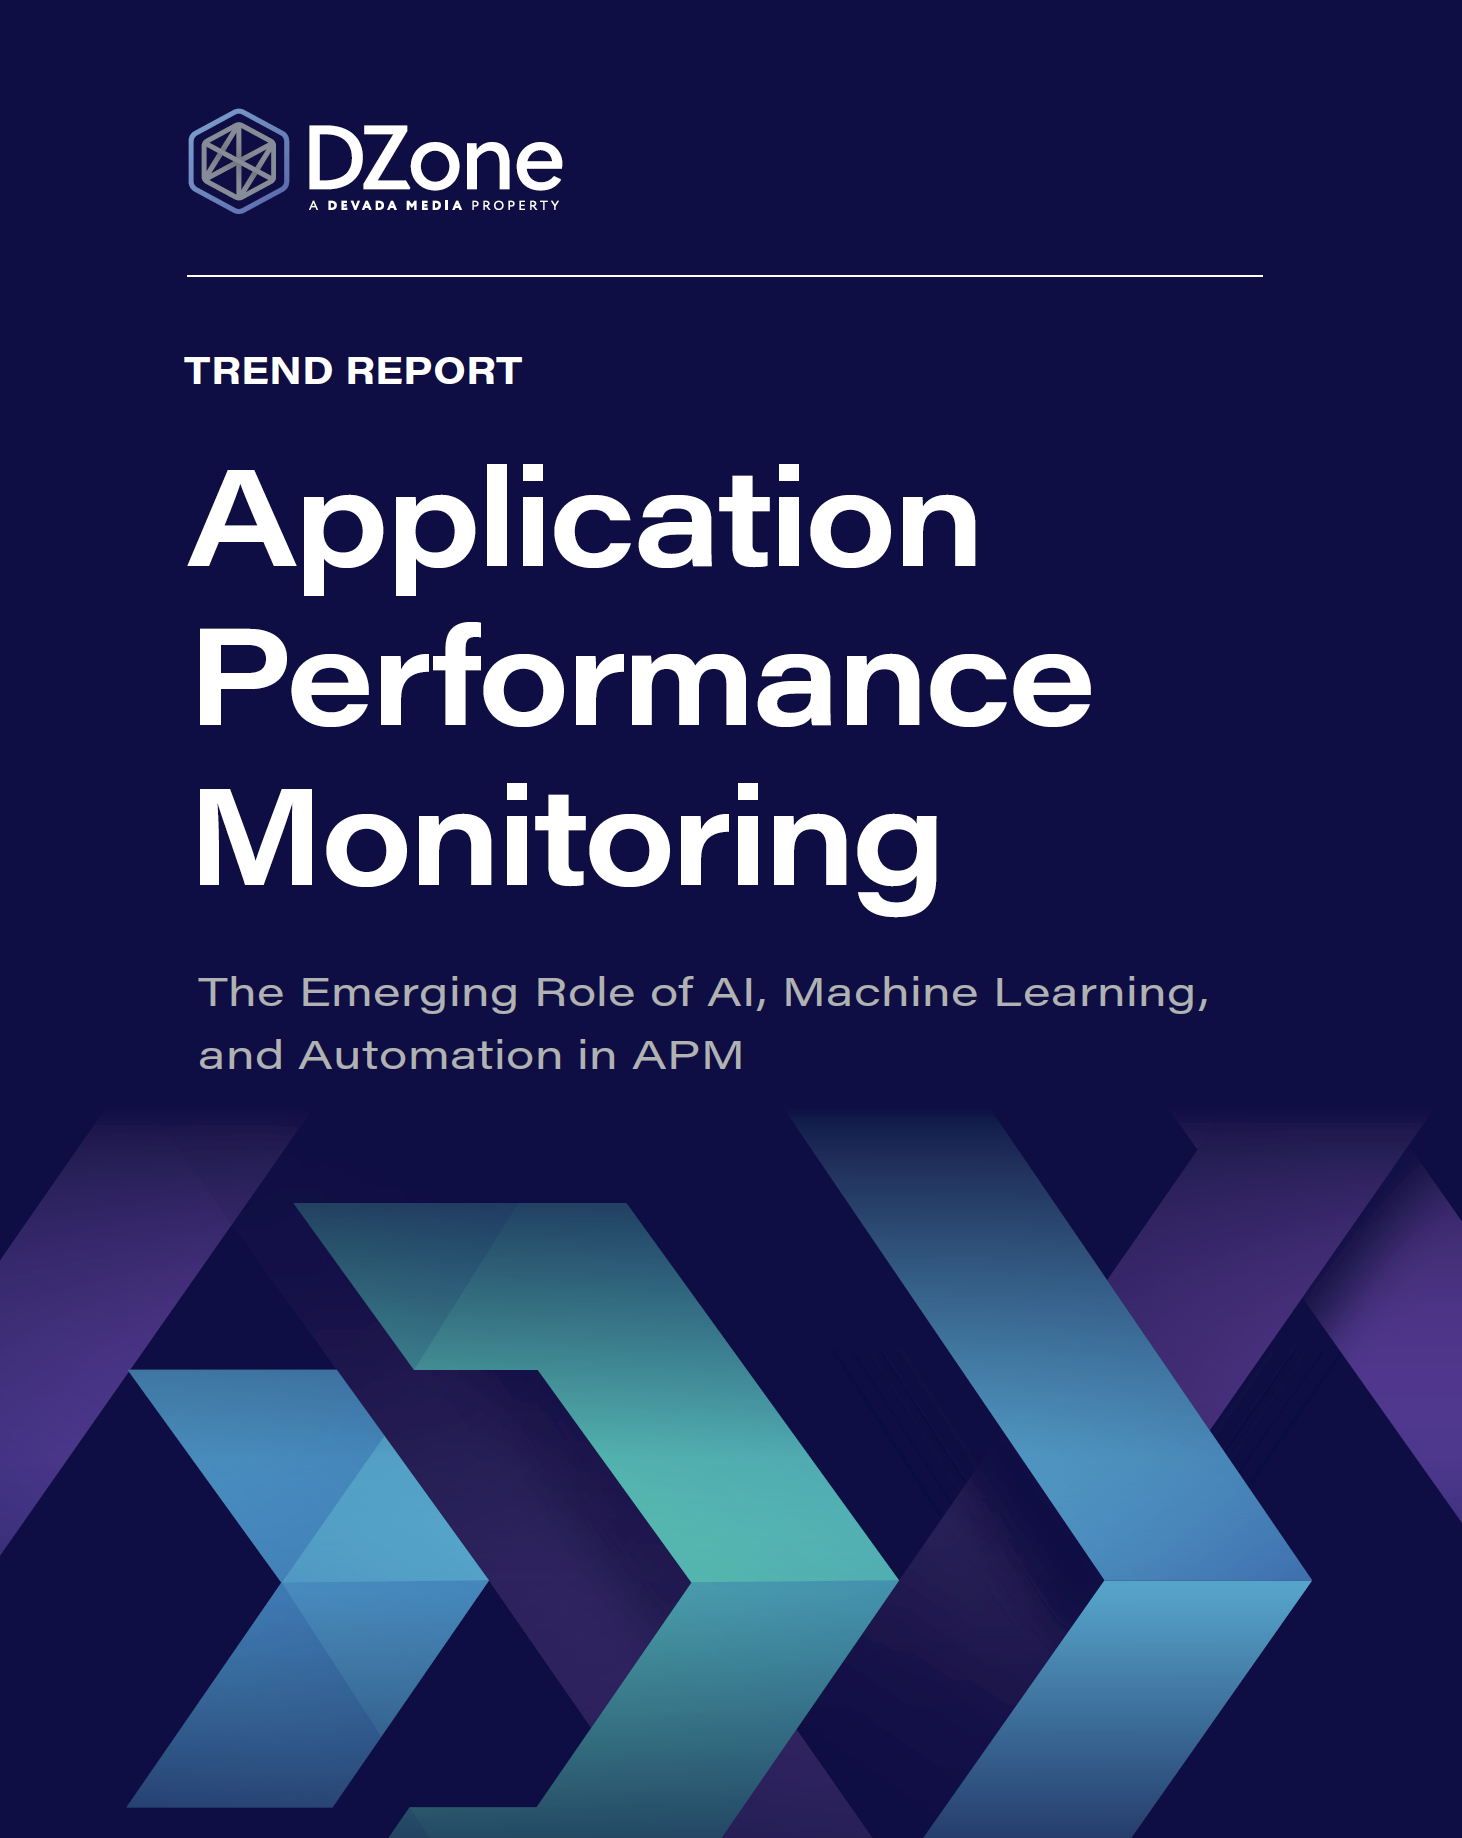 pcf performance monitoring system in neoload